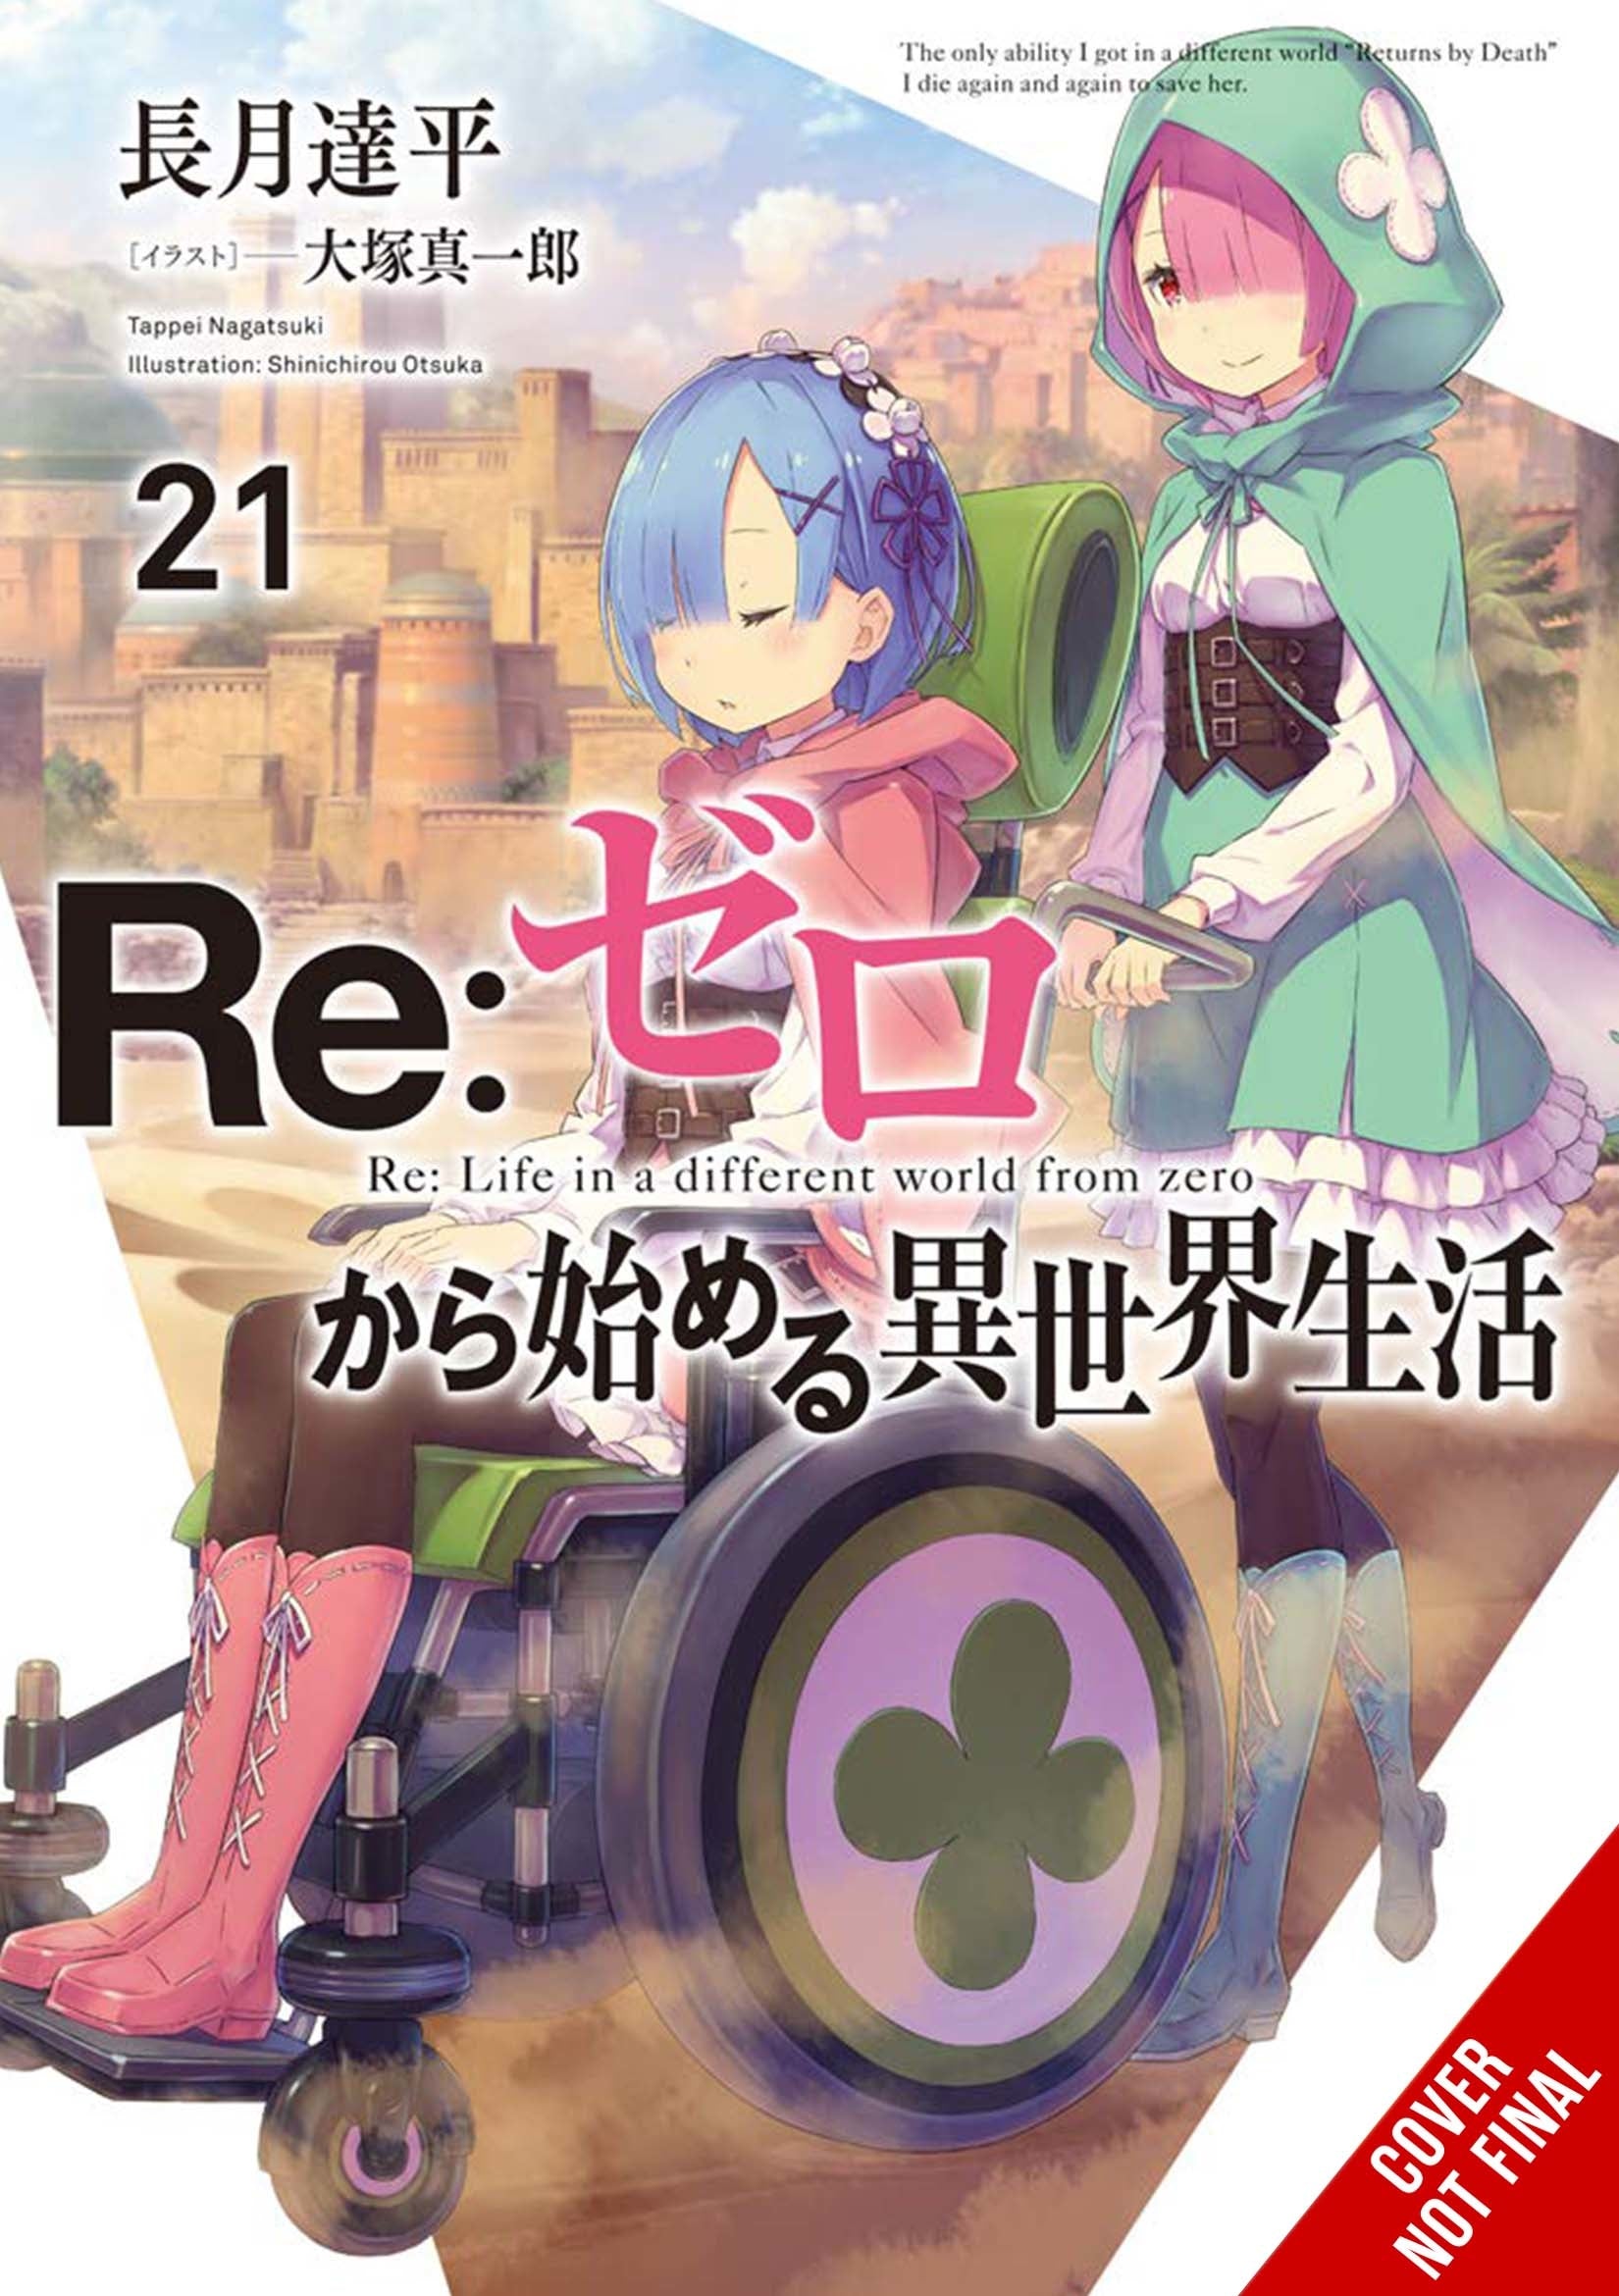 RE: Zero -Starting Life in Another World-, Vol. 12 (Light Novel) - by  Tappei Nagatsuki (Paperback)